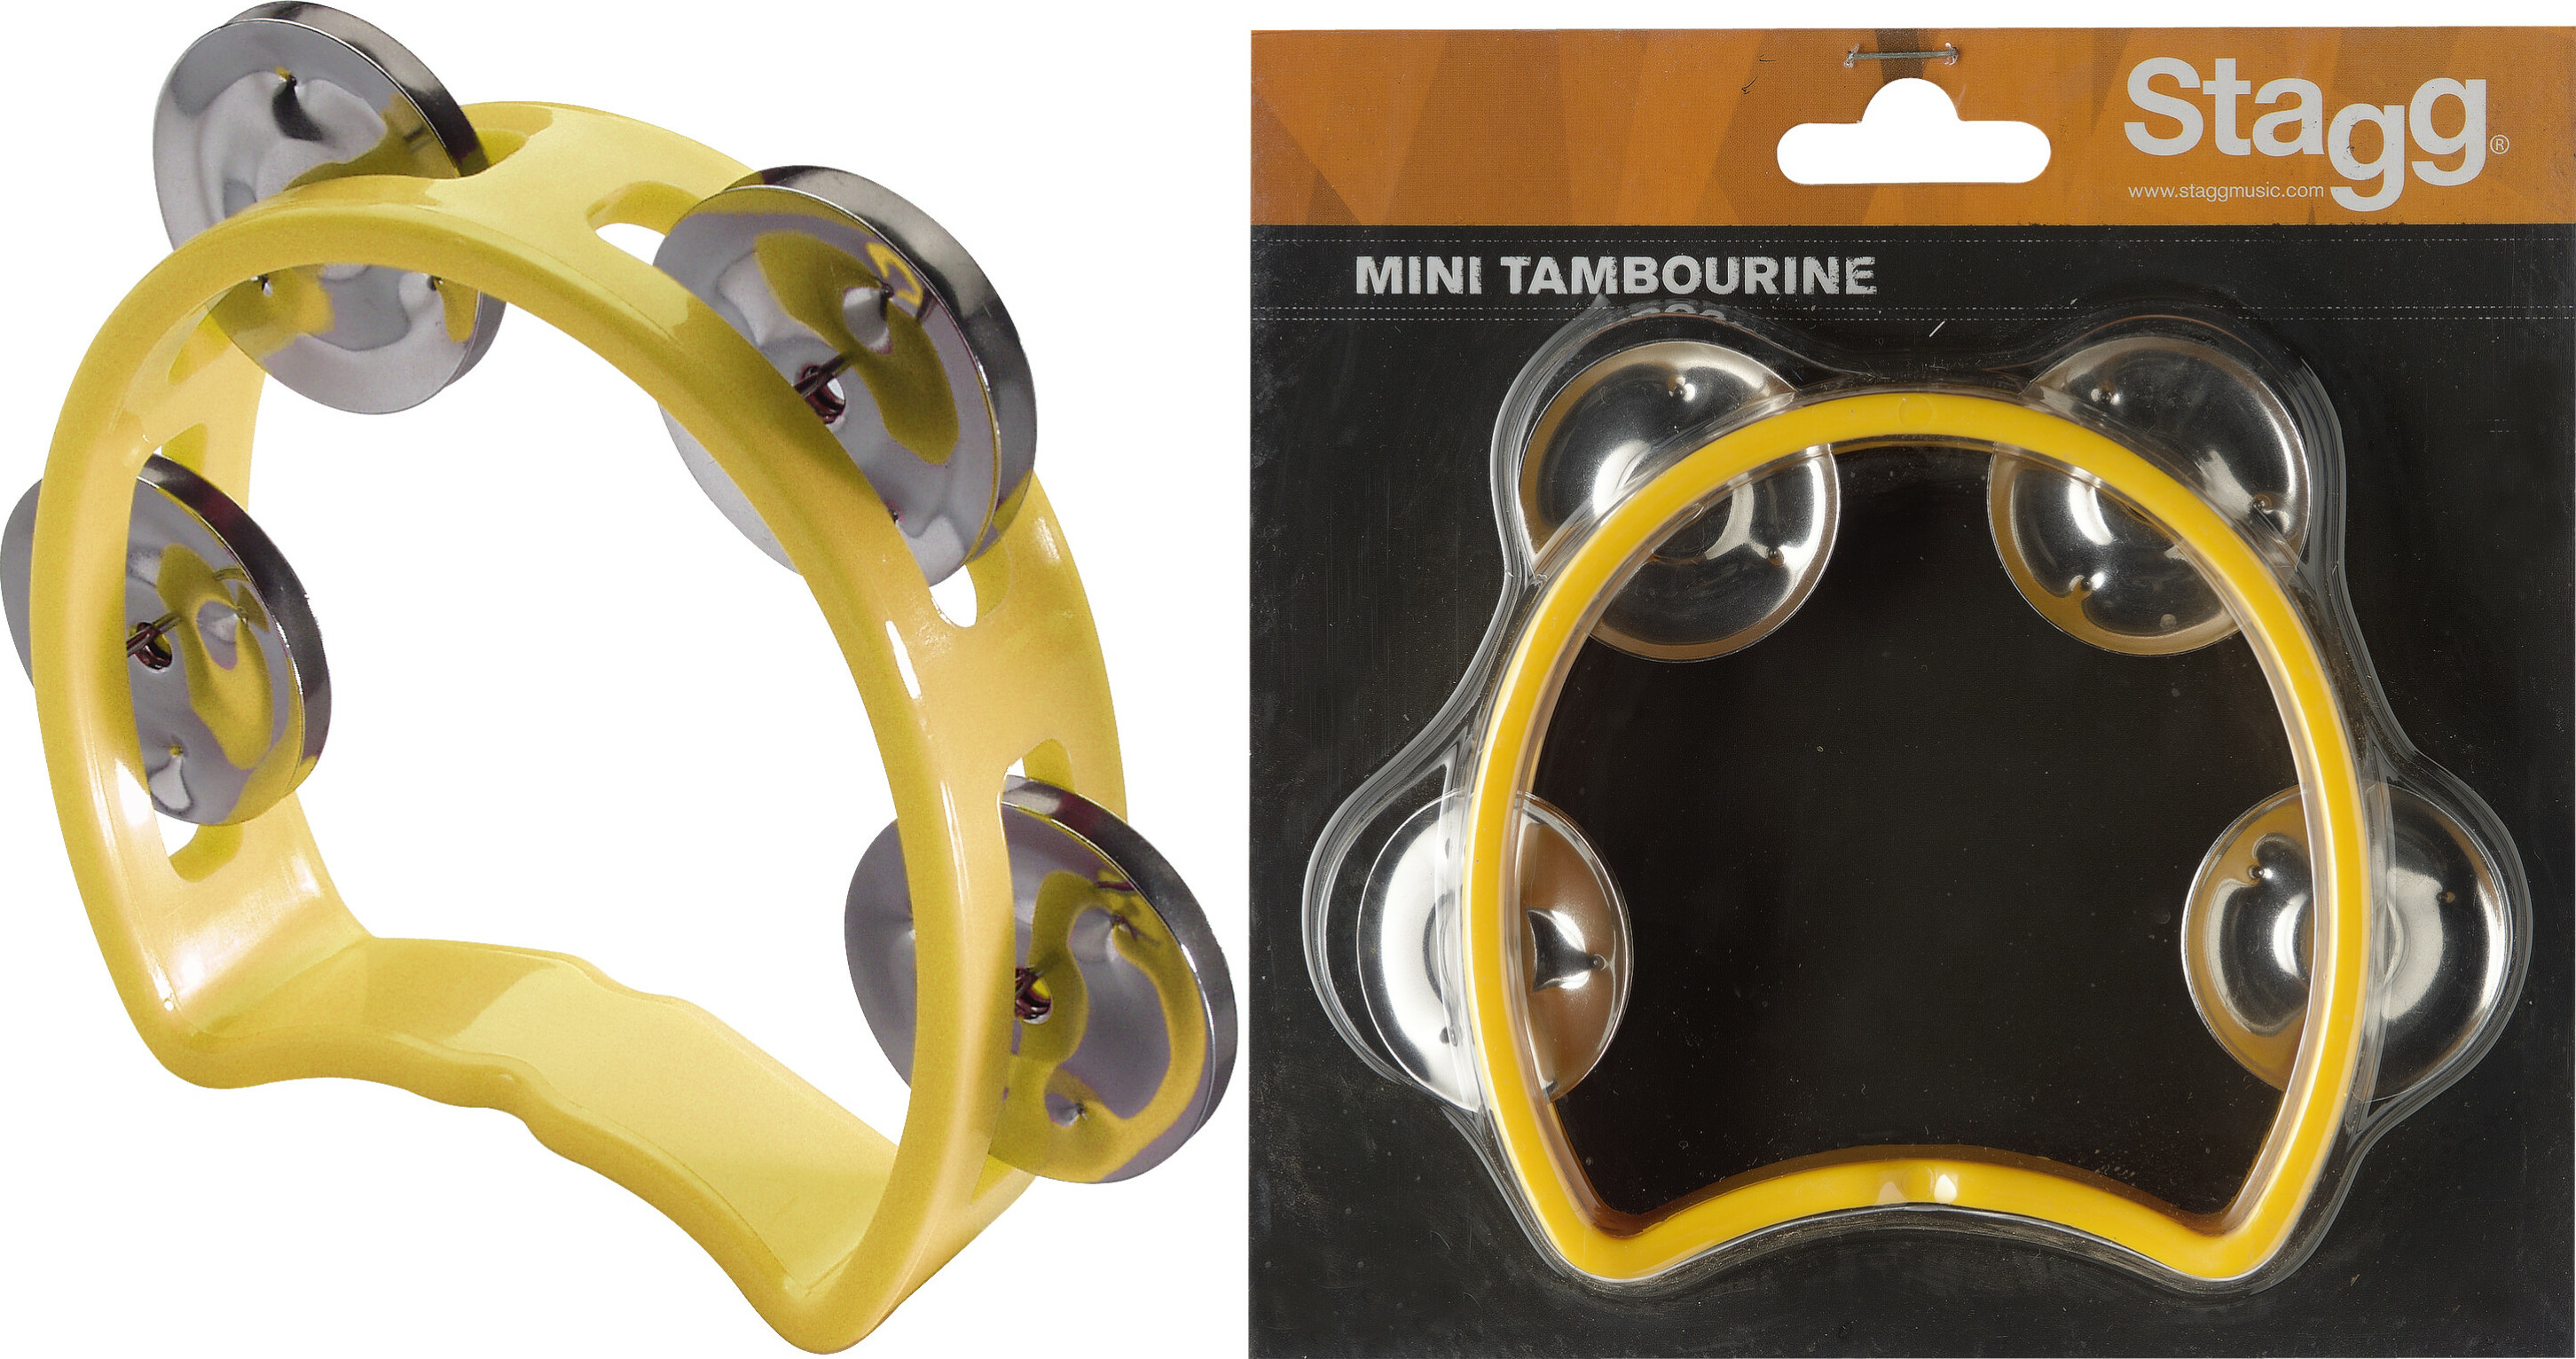 Stagg Tab-mini/yw Plastique 4 Cymbalettes Yellow - Percussions À Secouer - Main picture